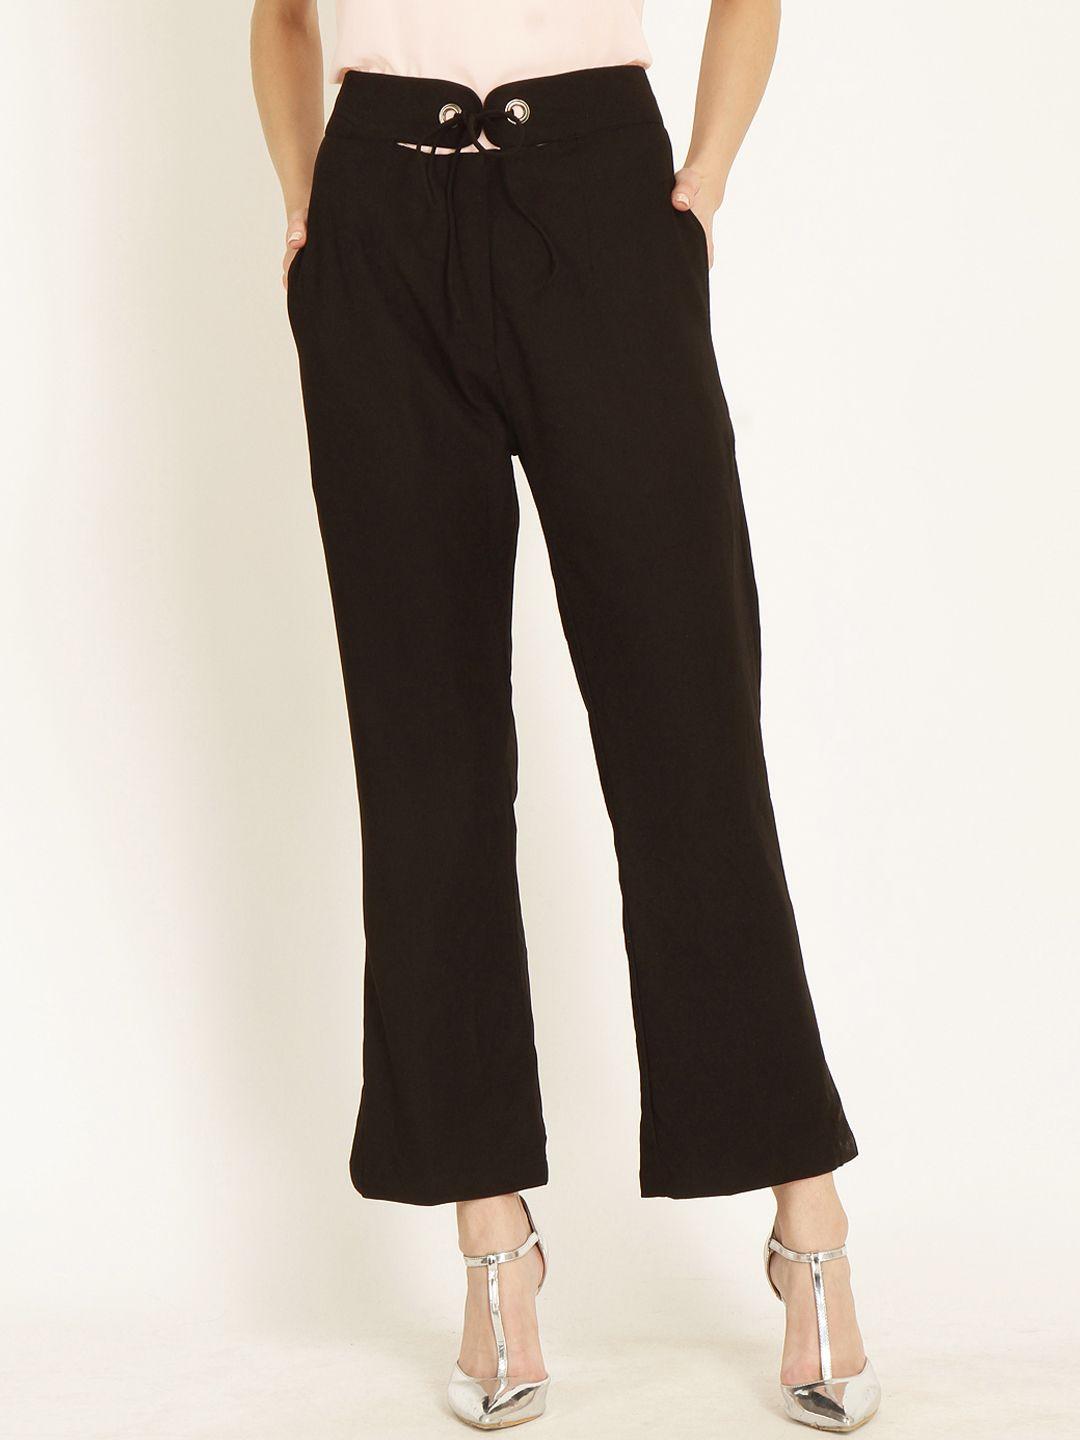 marie claire women black regular fit solid bootcut trousers